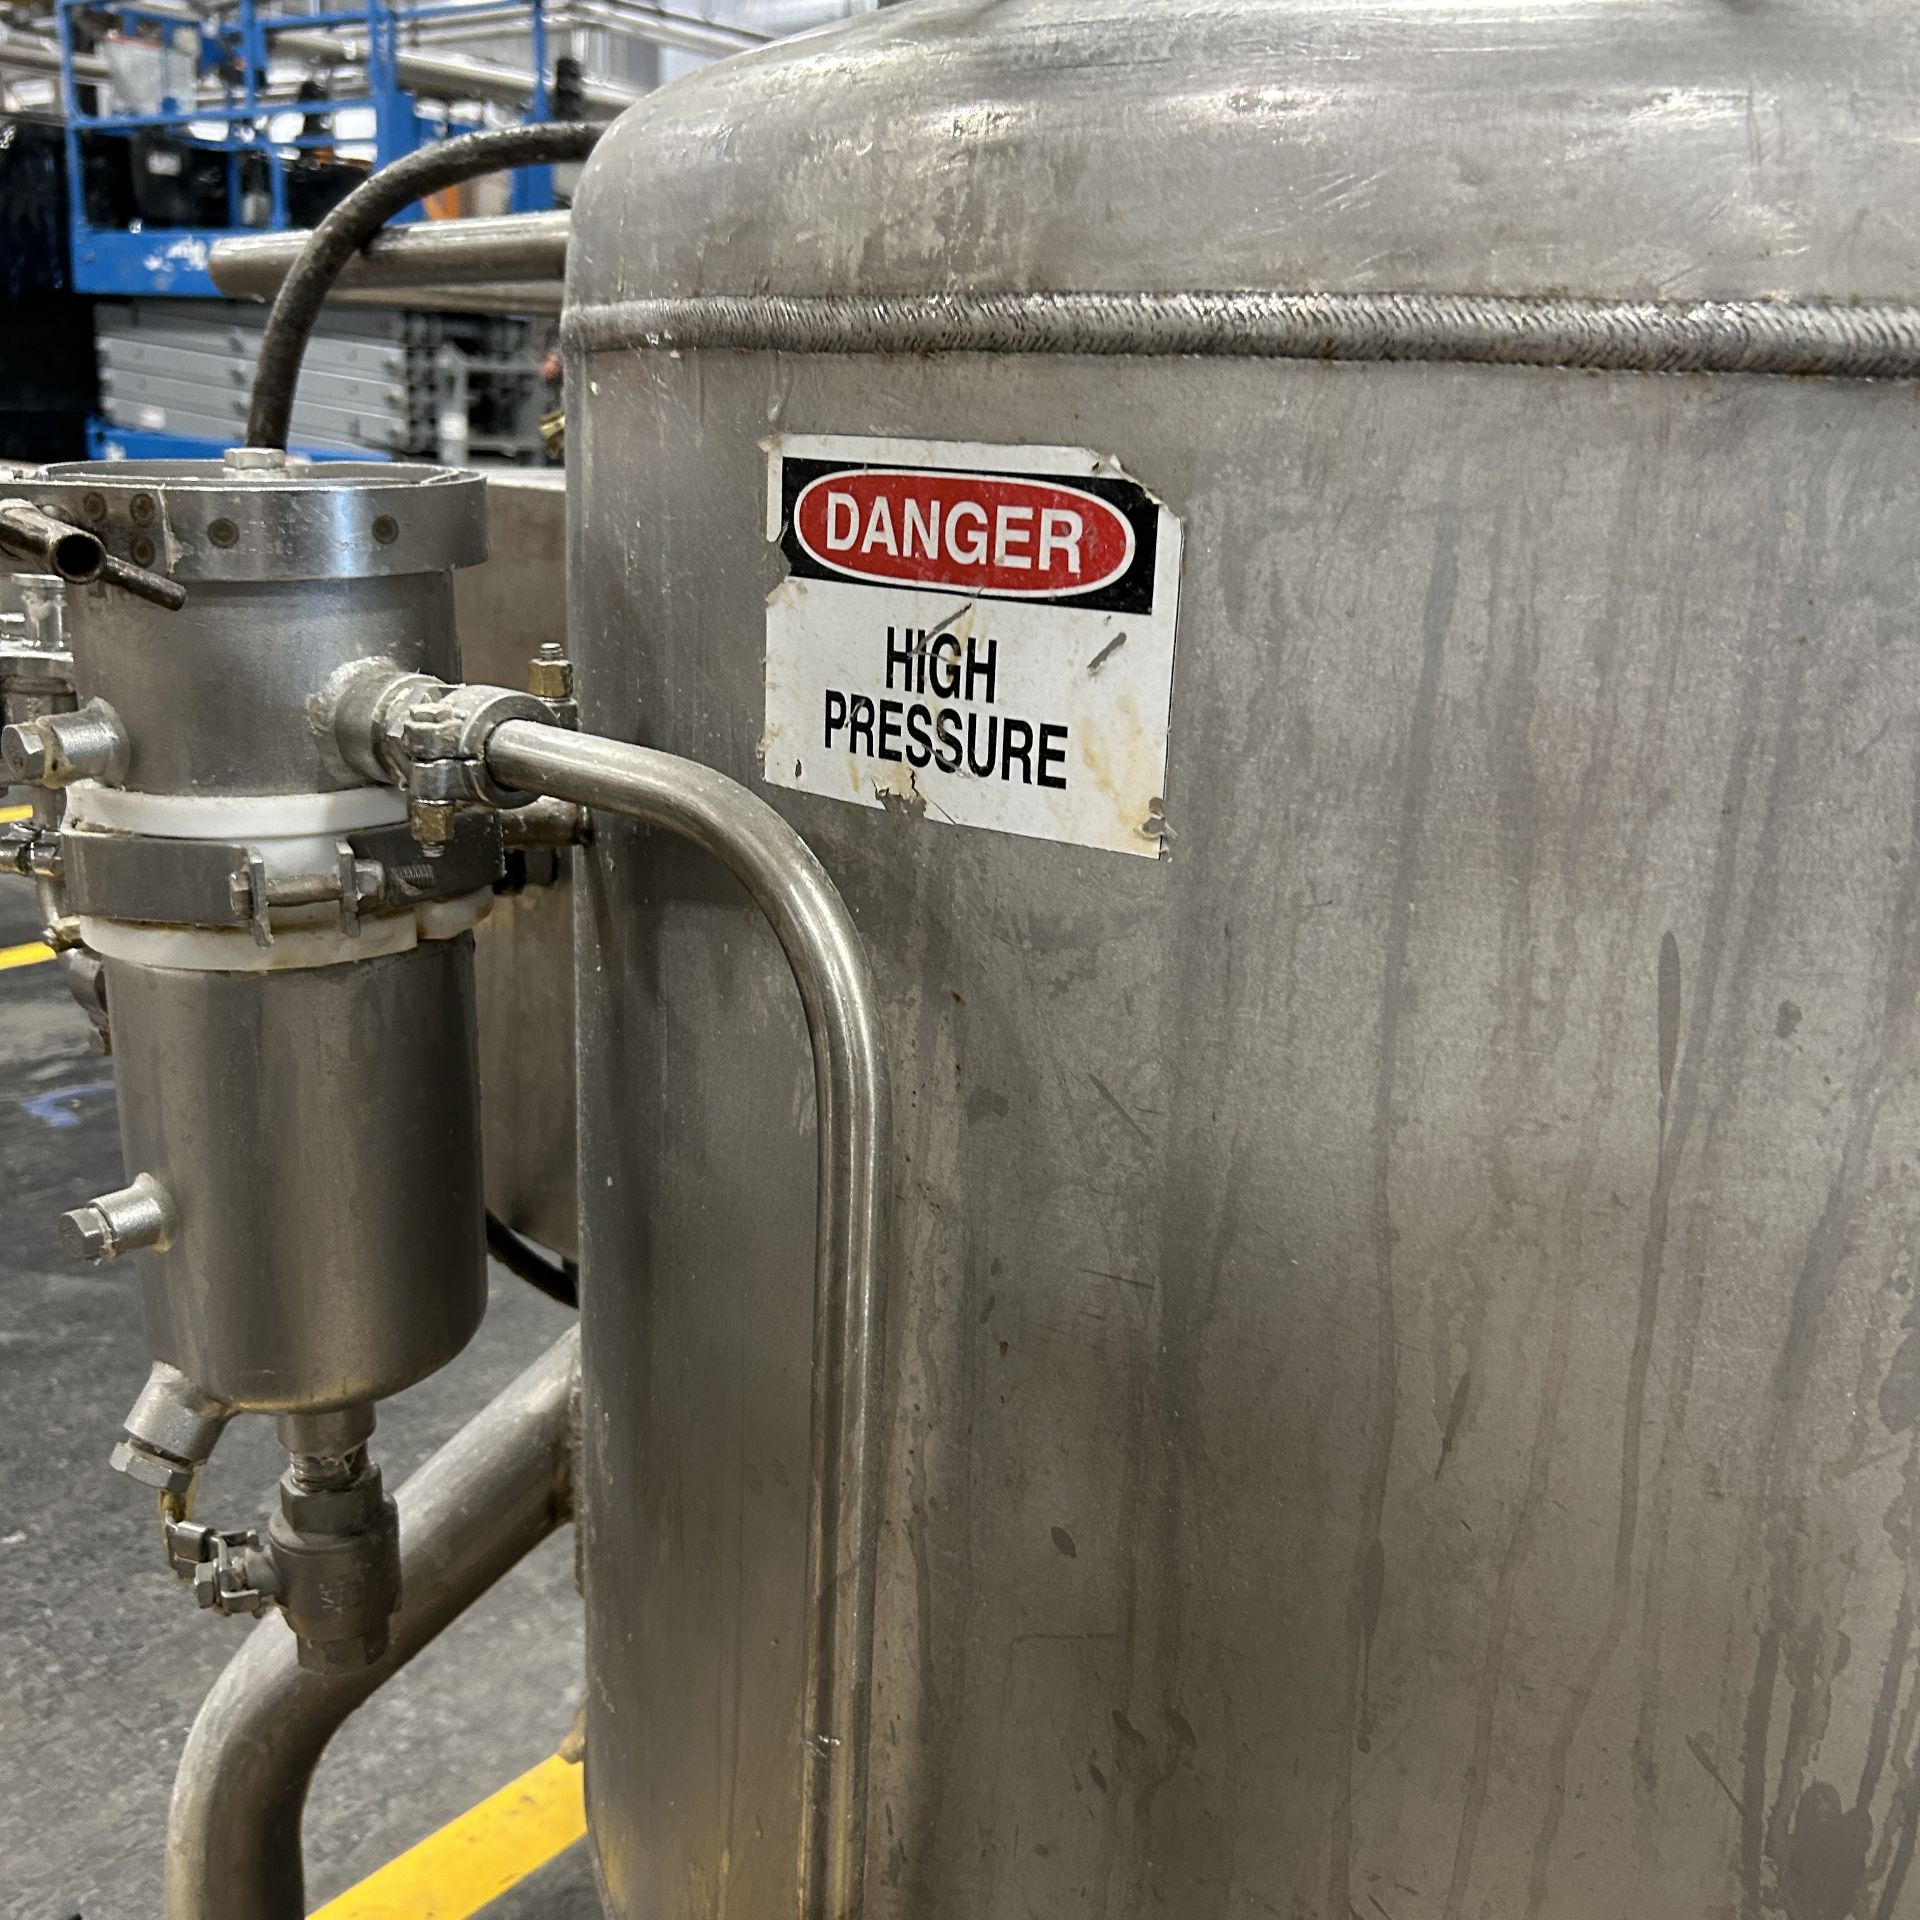 2021 Amherst Stainless Steel Agitation Pressure Pot - Image 6 of 8